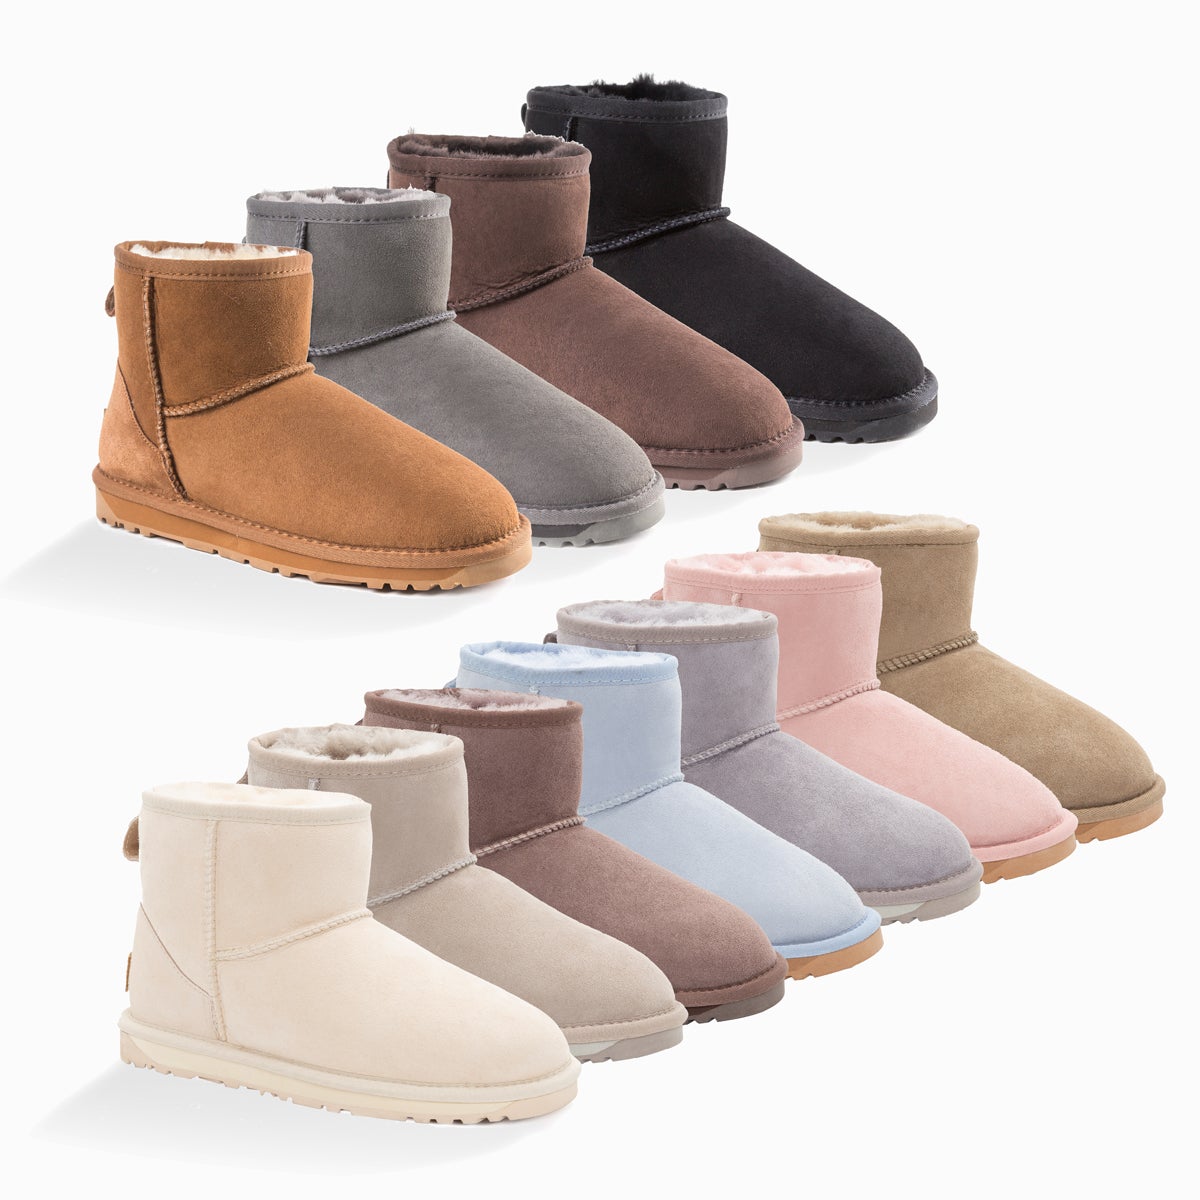 Ugg Classic Mini Boots (Water Resistant) Ozwear Ugg